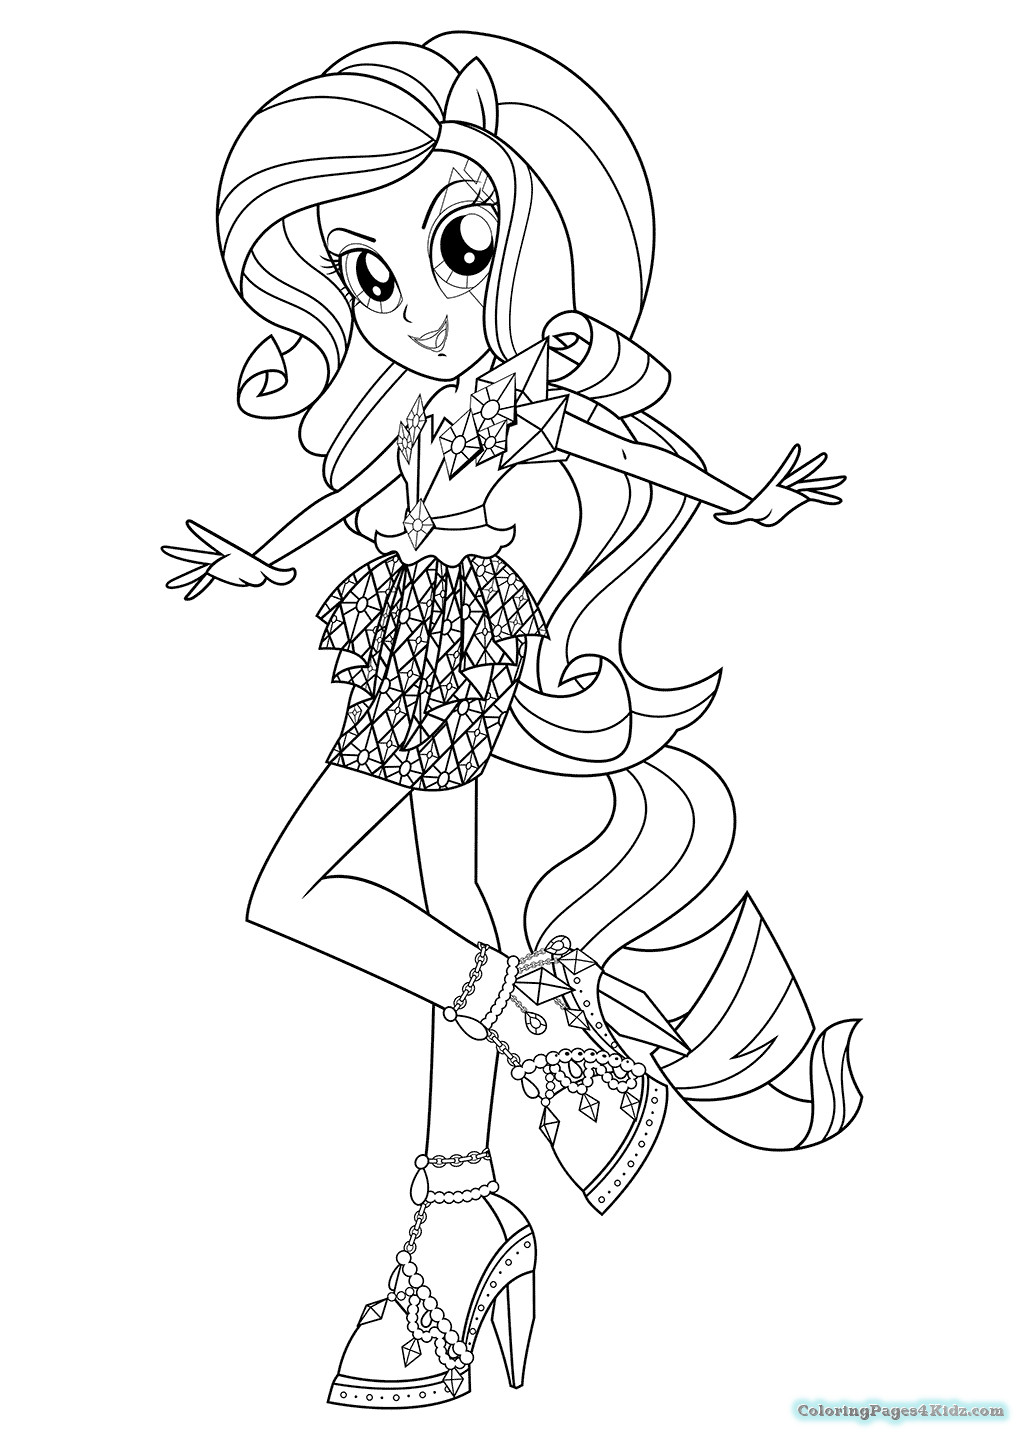 Rainbow Rock Coloring Pages
 Equestria Girls Rainbow Rocks Coloring Pages